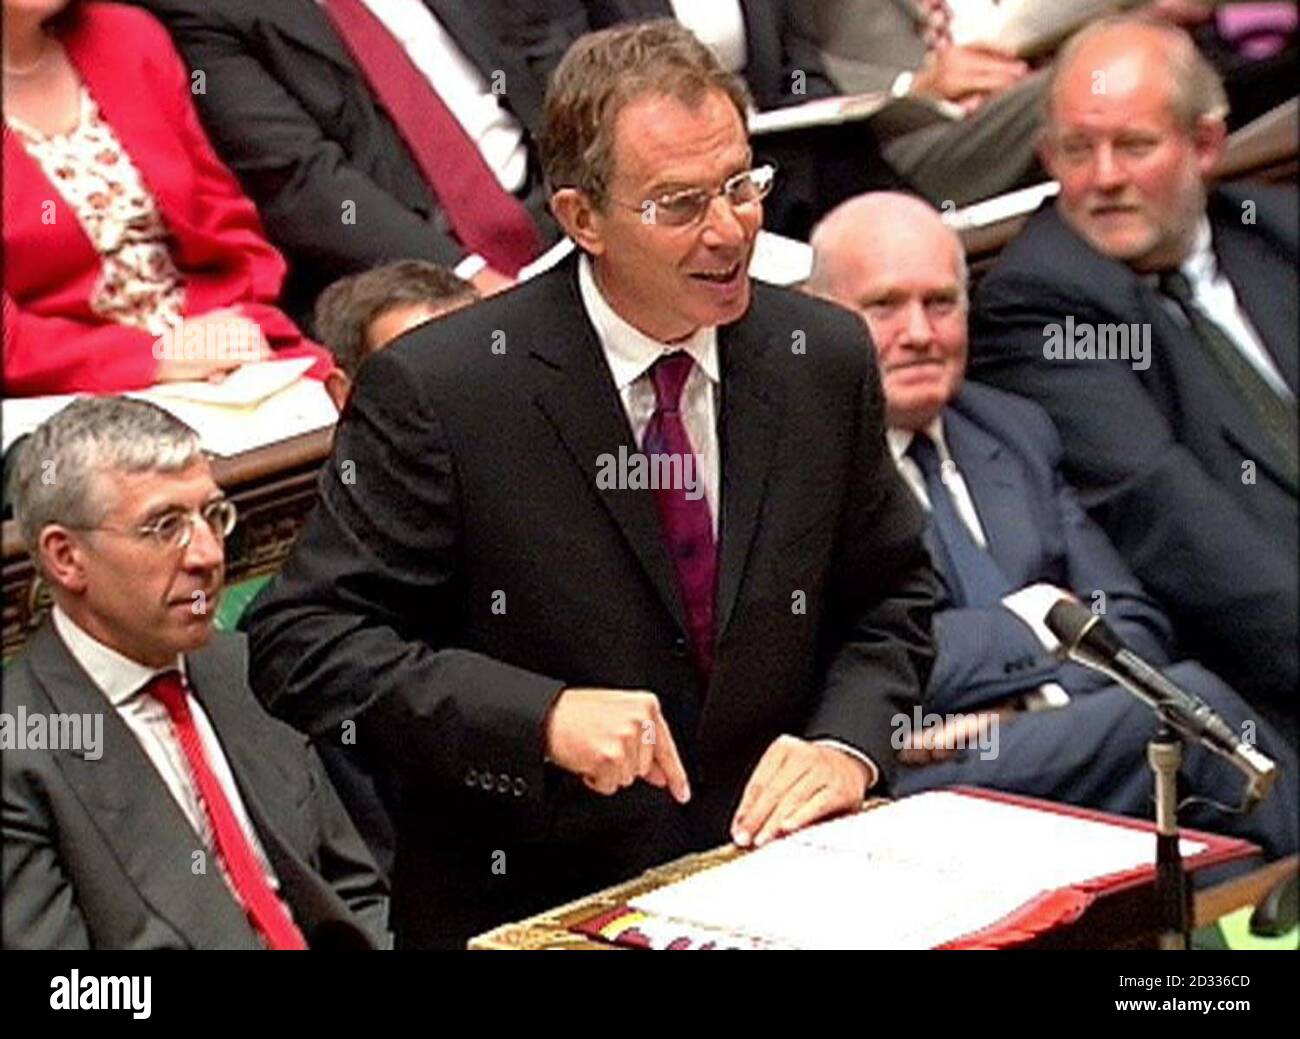 Prime Minister Tony Blair during Prime Minister's Question Time in the House of Commons, central London. Mr Blair said in the Commons that he would not rule out the option of holding a referendum on UK membership of the European single currency during the current Parliament. Stock Photo